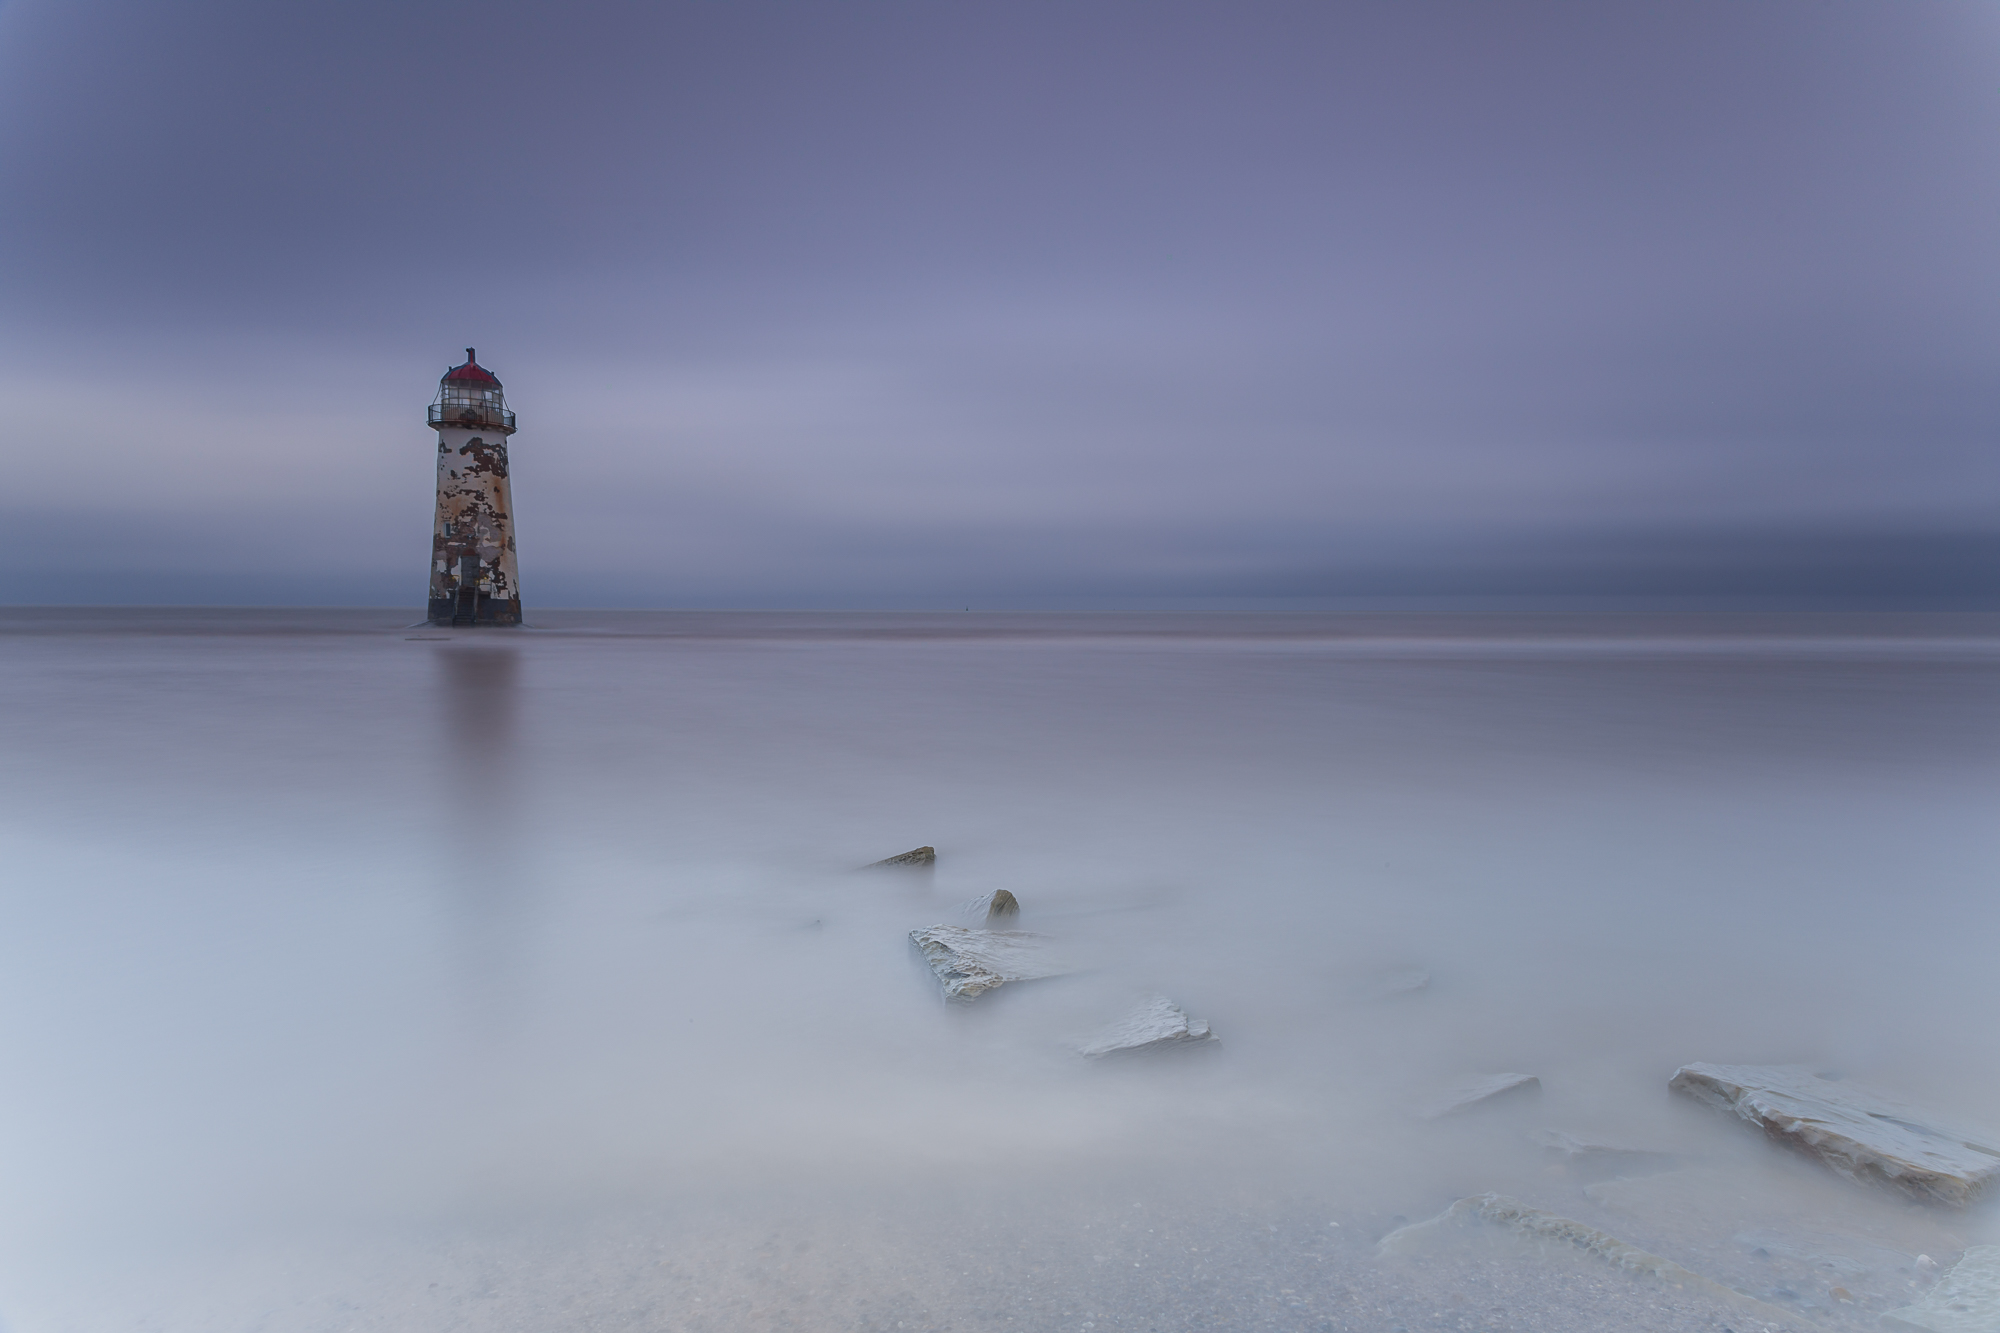 'The Lighthouse' By Seshi Middela LRPS